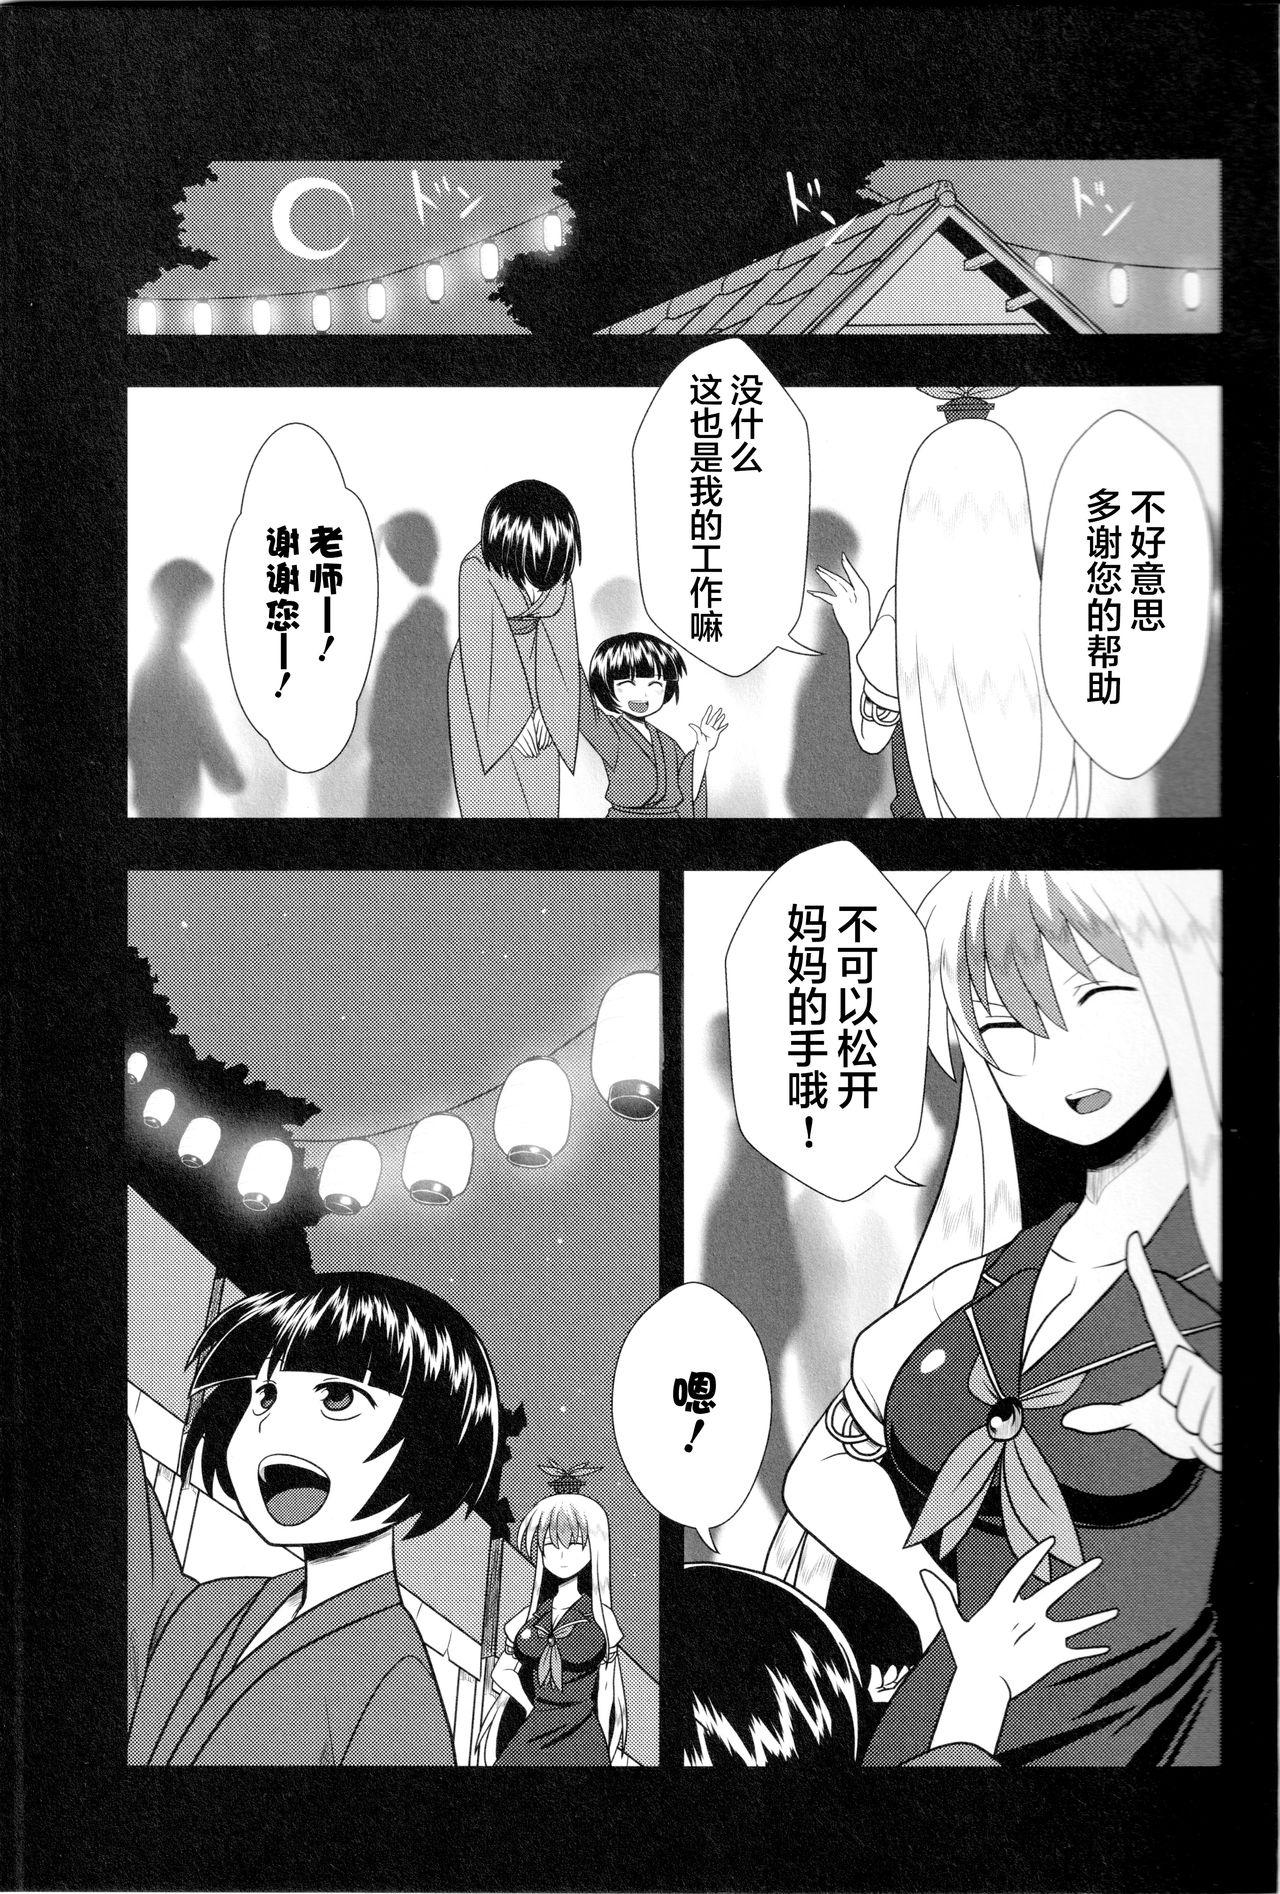 Hidden Camera kyo no korindo - Touhou project Prostitute - Page 8